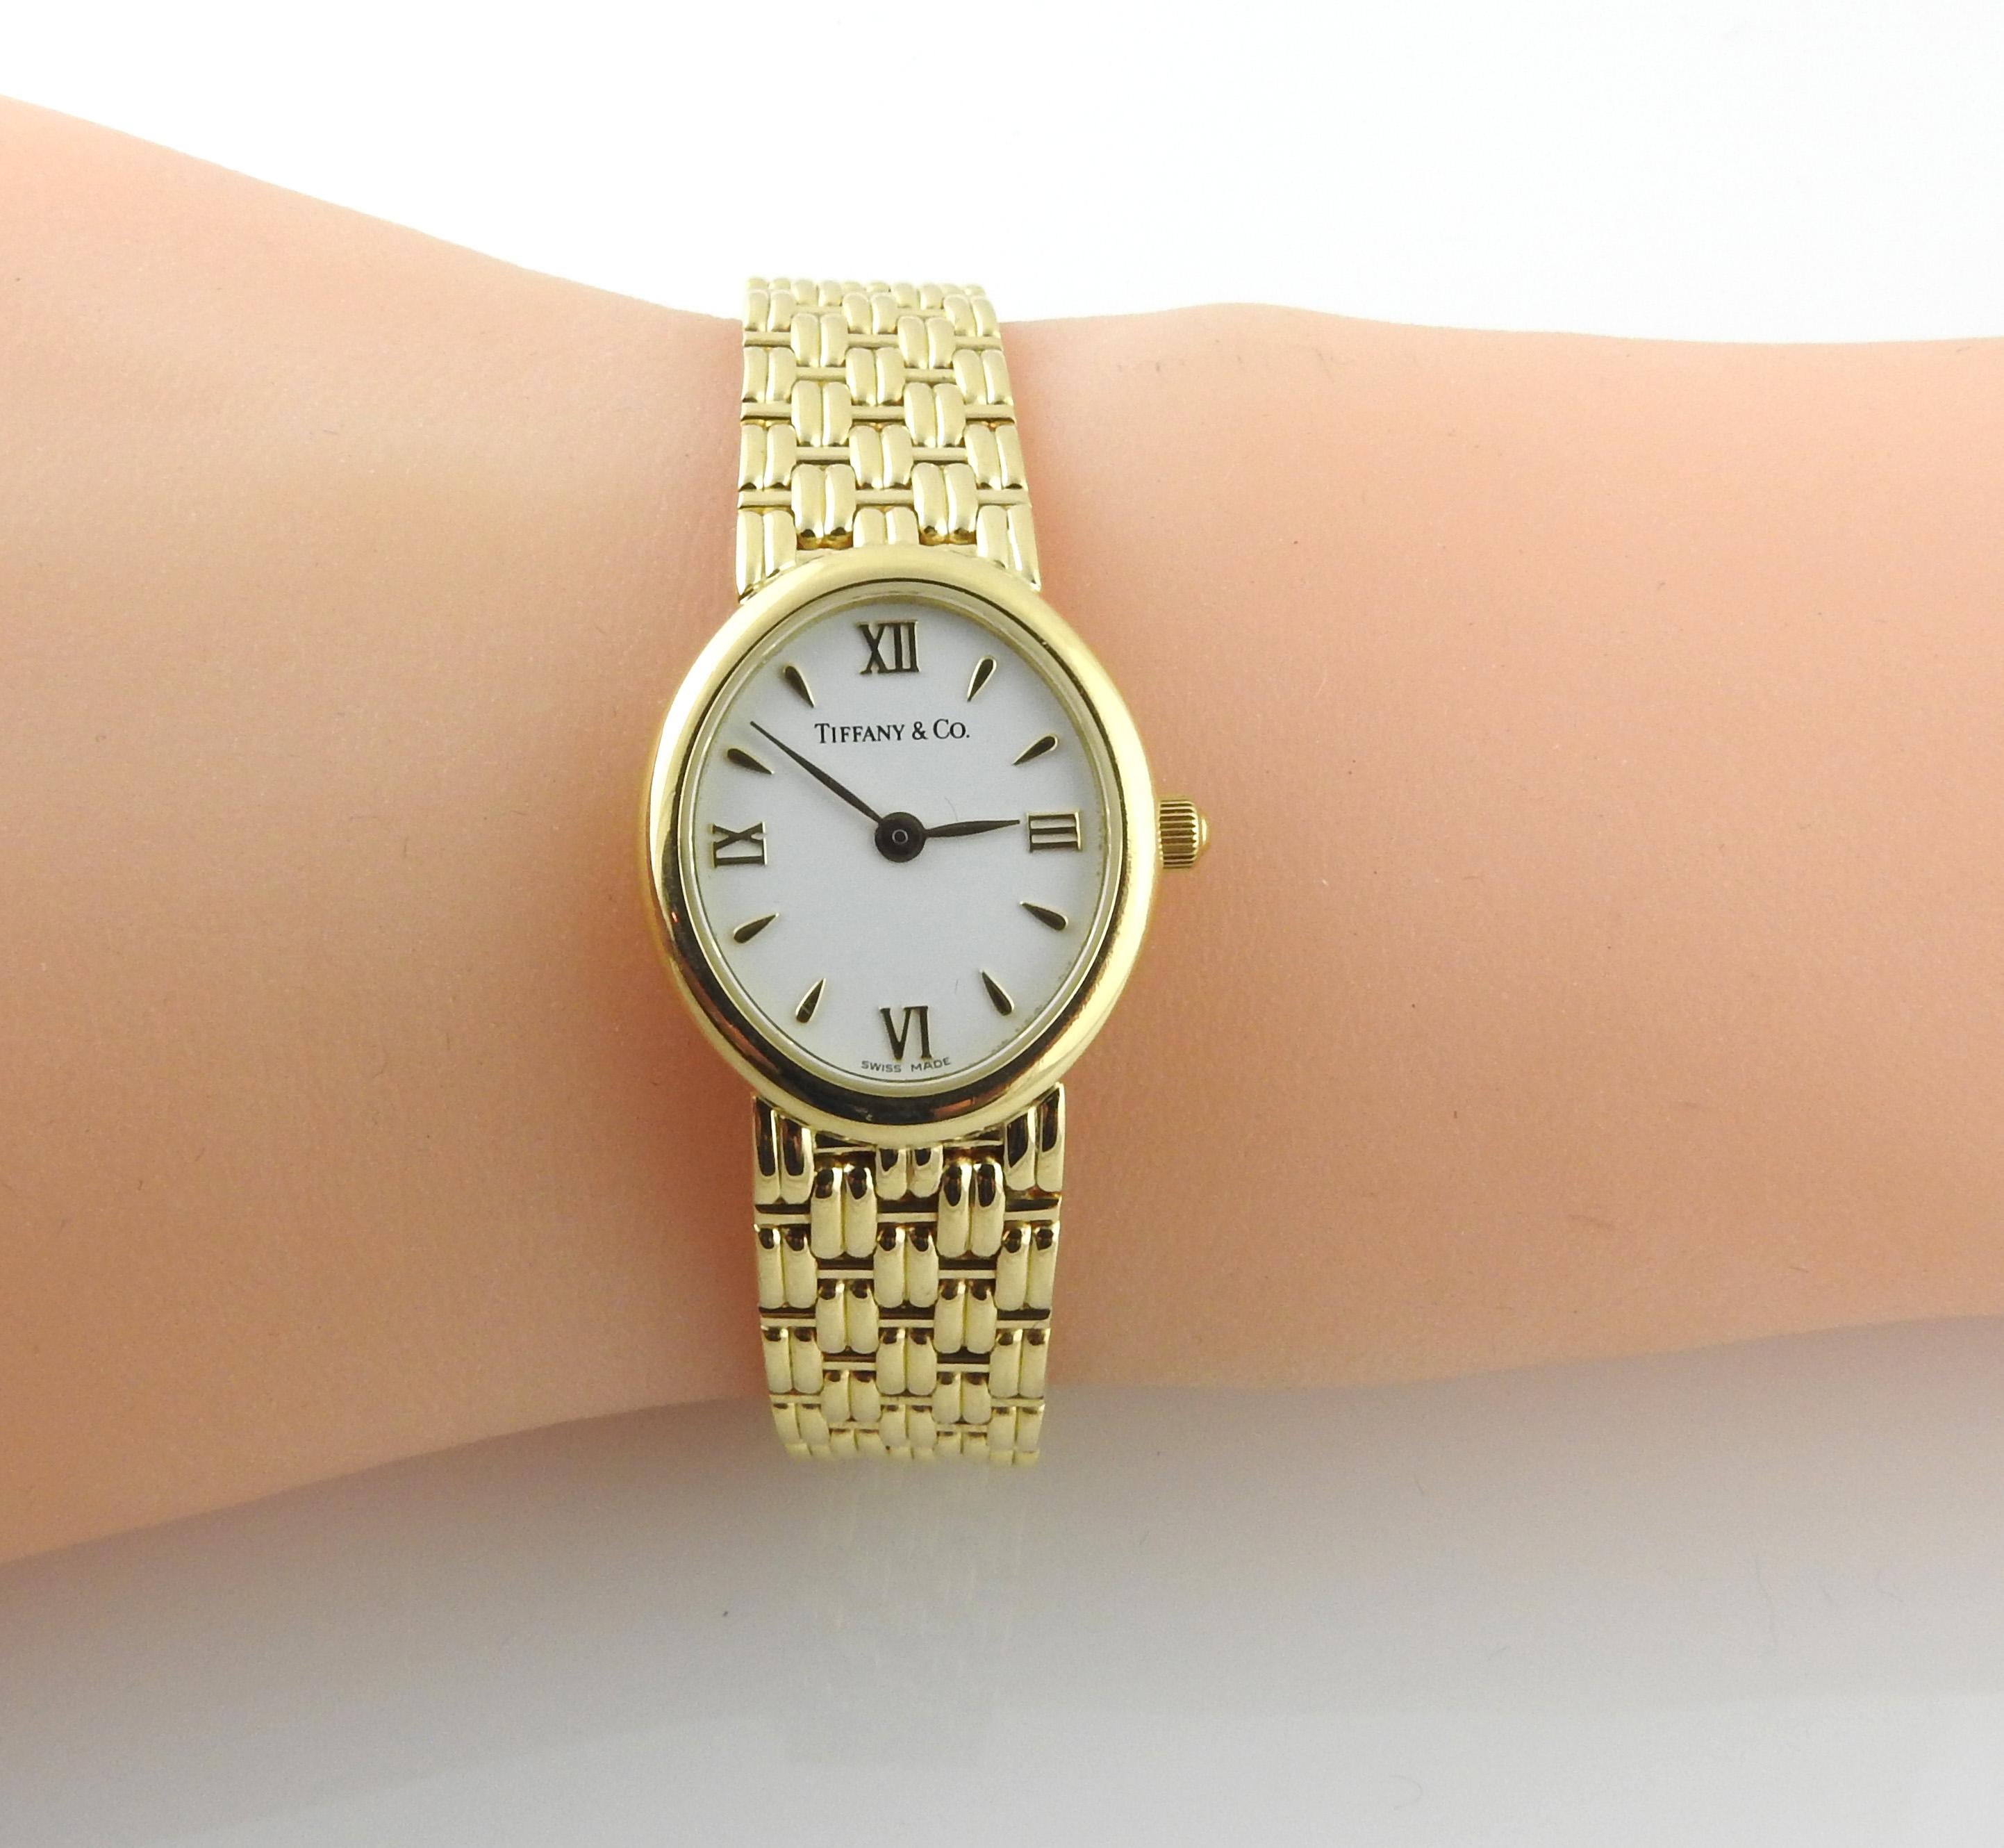 Tiffany & Co. 18k Yellow Gold Ladies Watch White Dial Basket Weave Band 4